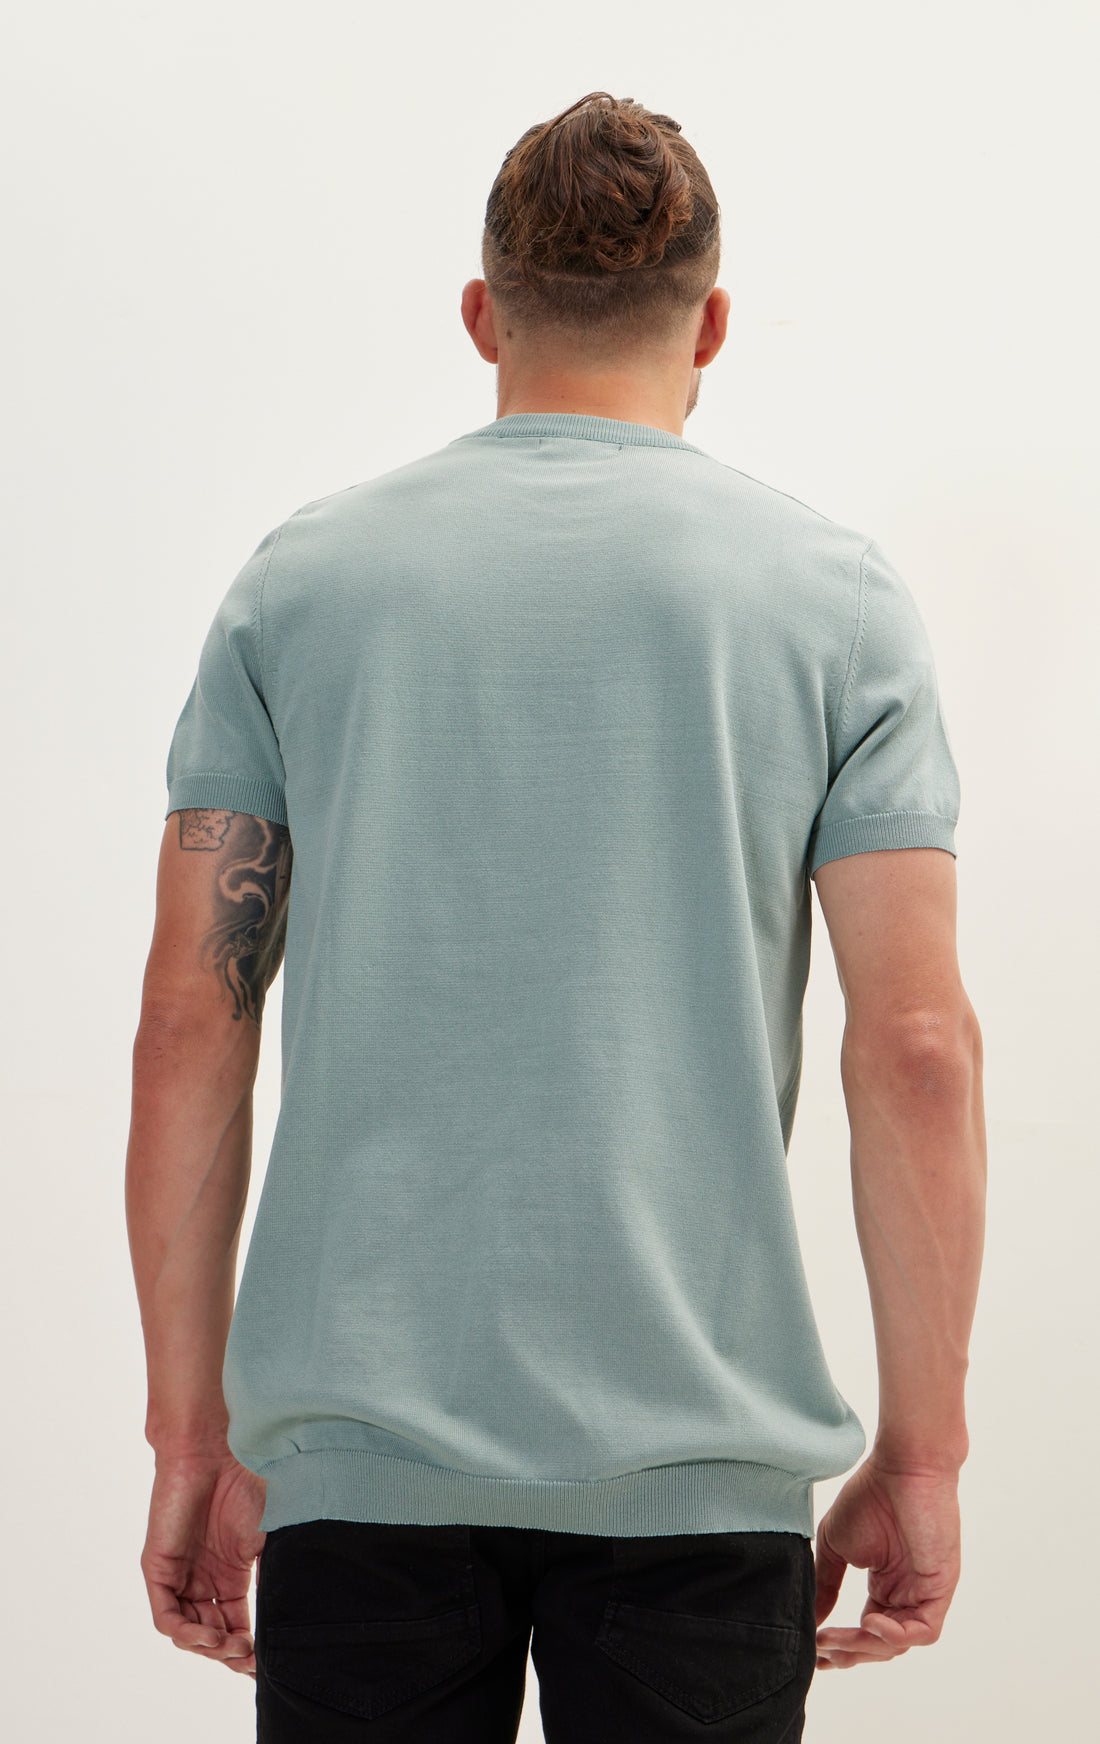 Teal Green Knitted T-Shirt